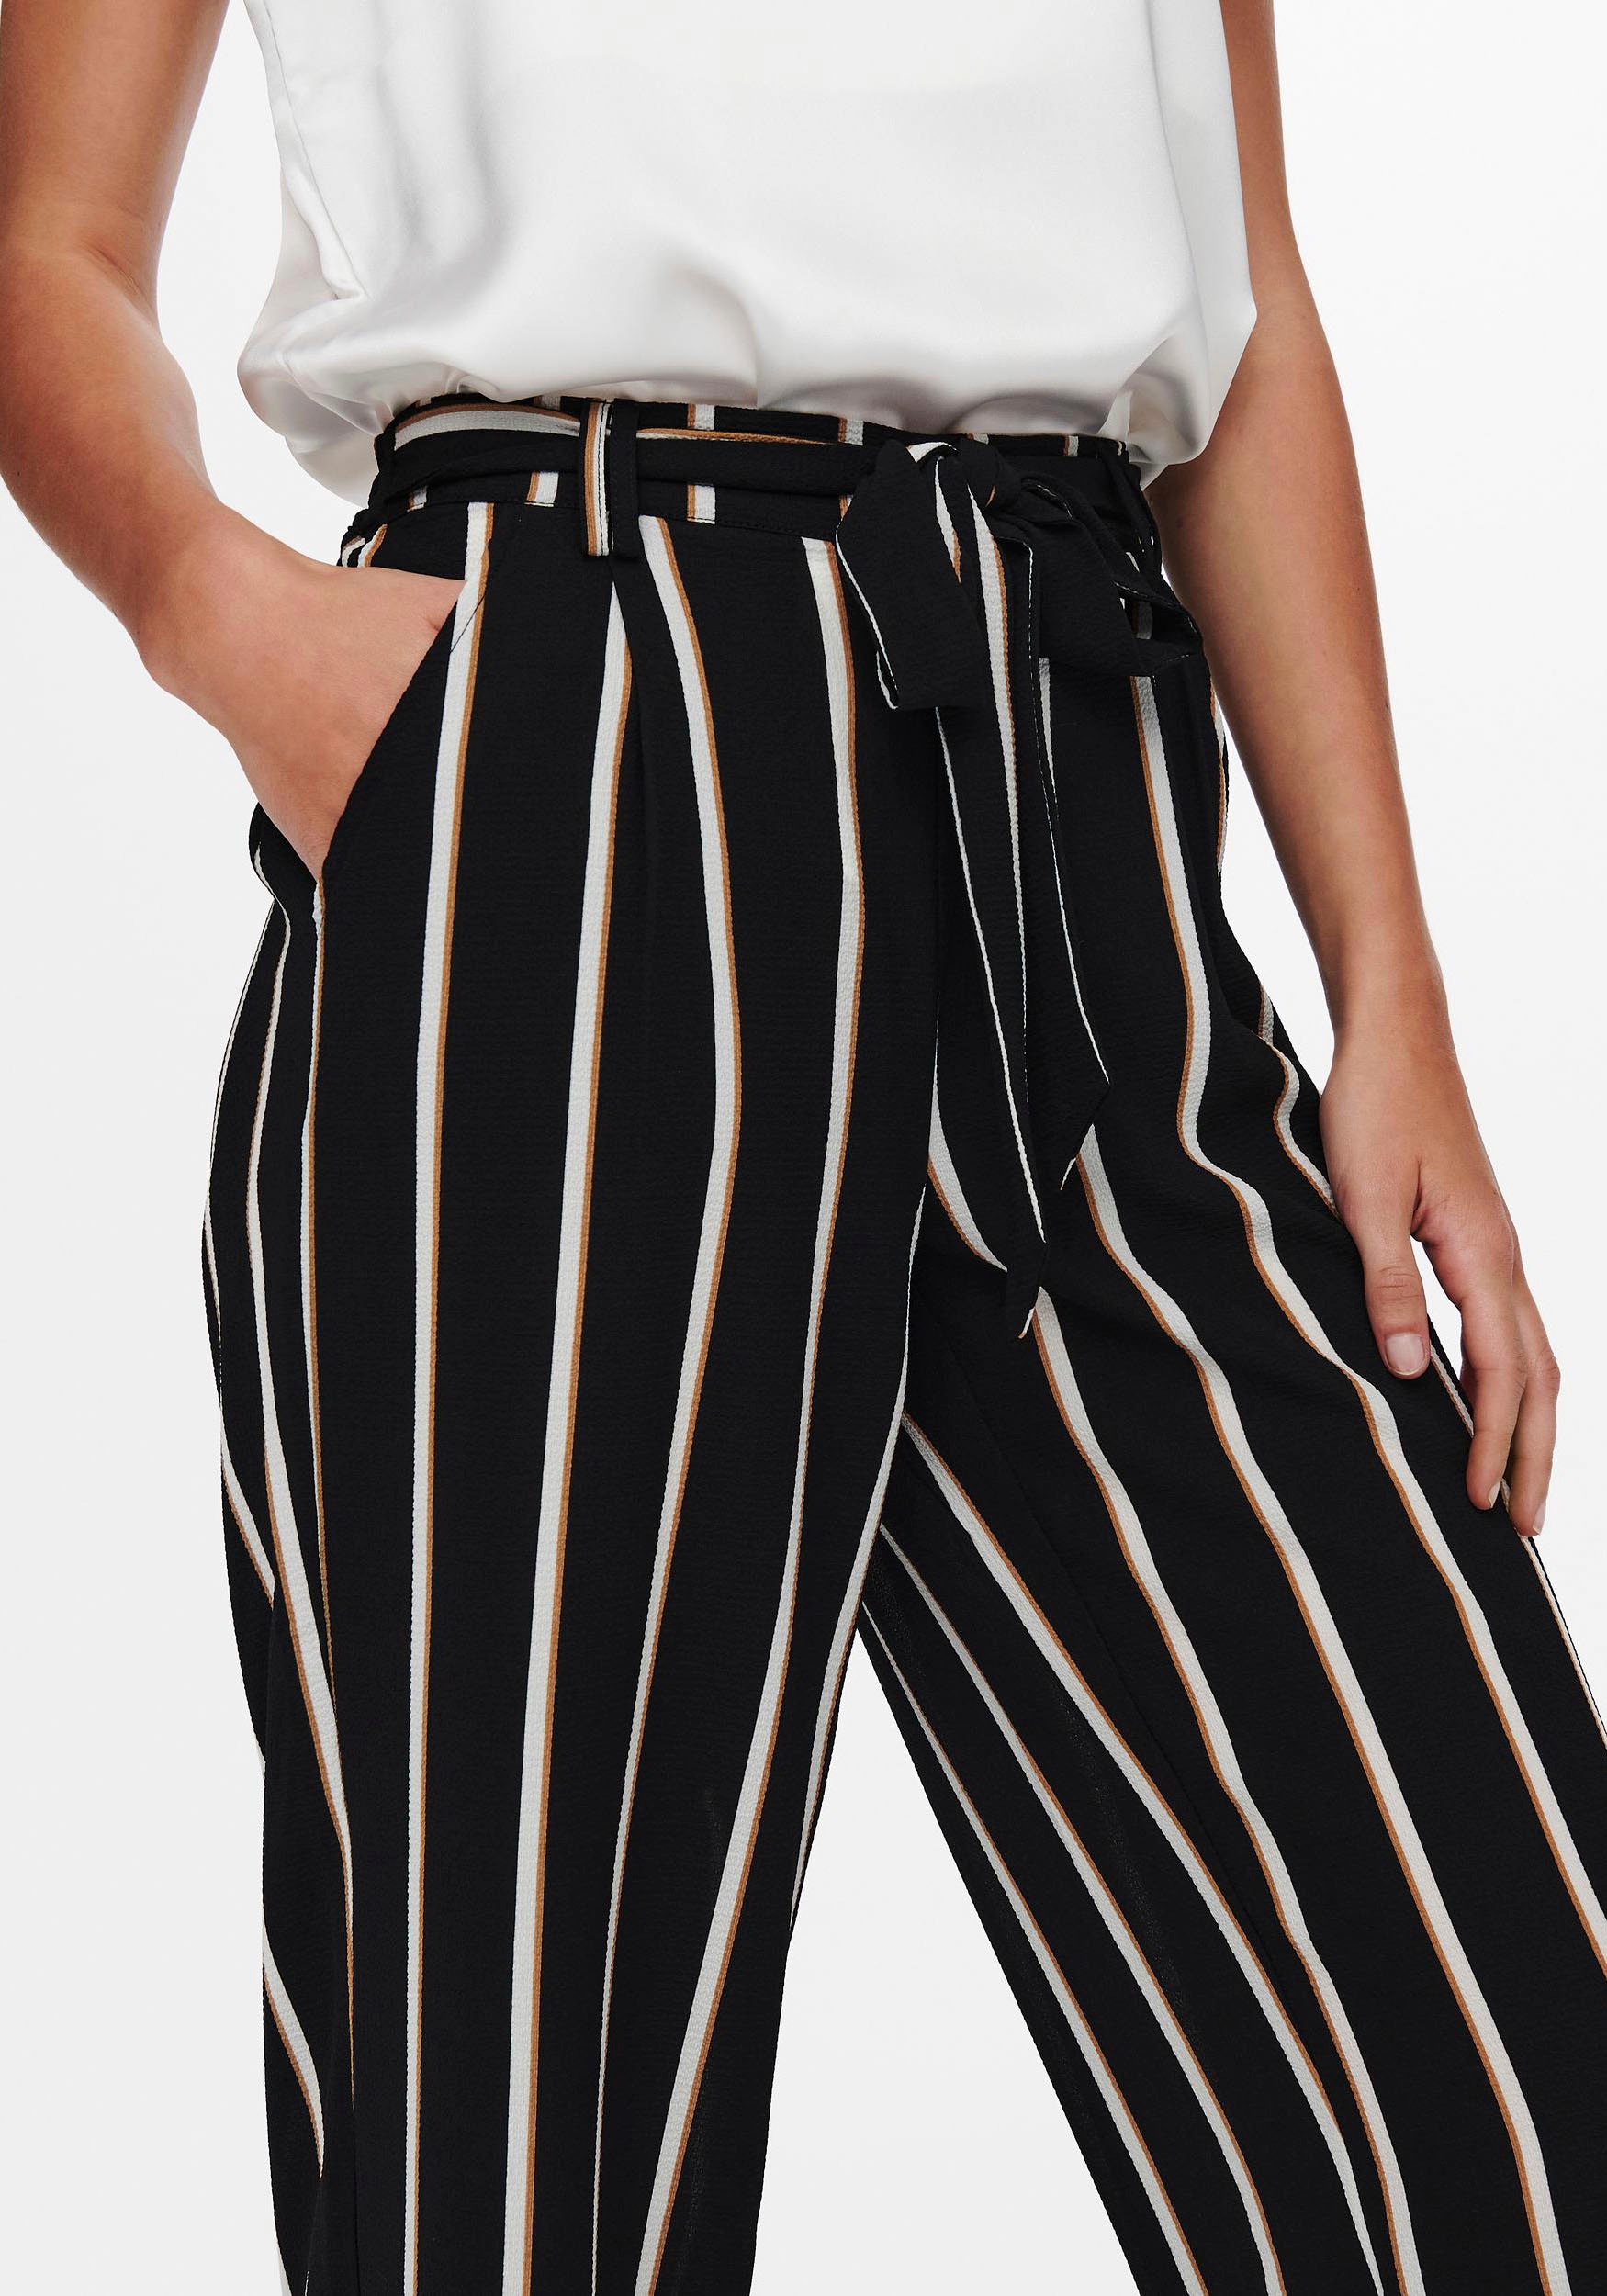 ONLY PTM«, gestreiftem oder PANT OTTO uni Design »ONLWINNER PALAZZO bei NOOS CULOTTE Palazzohose in